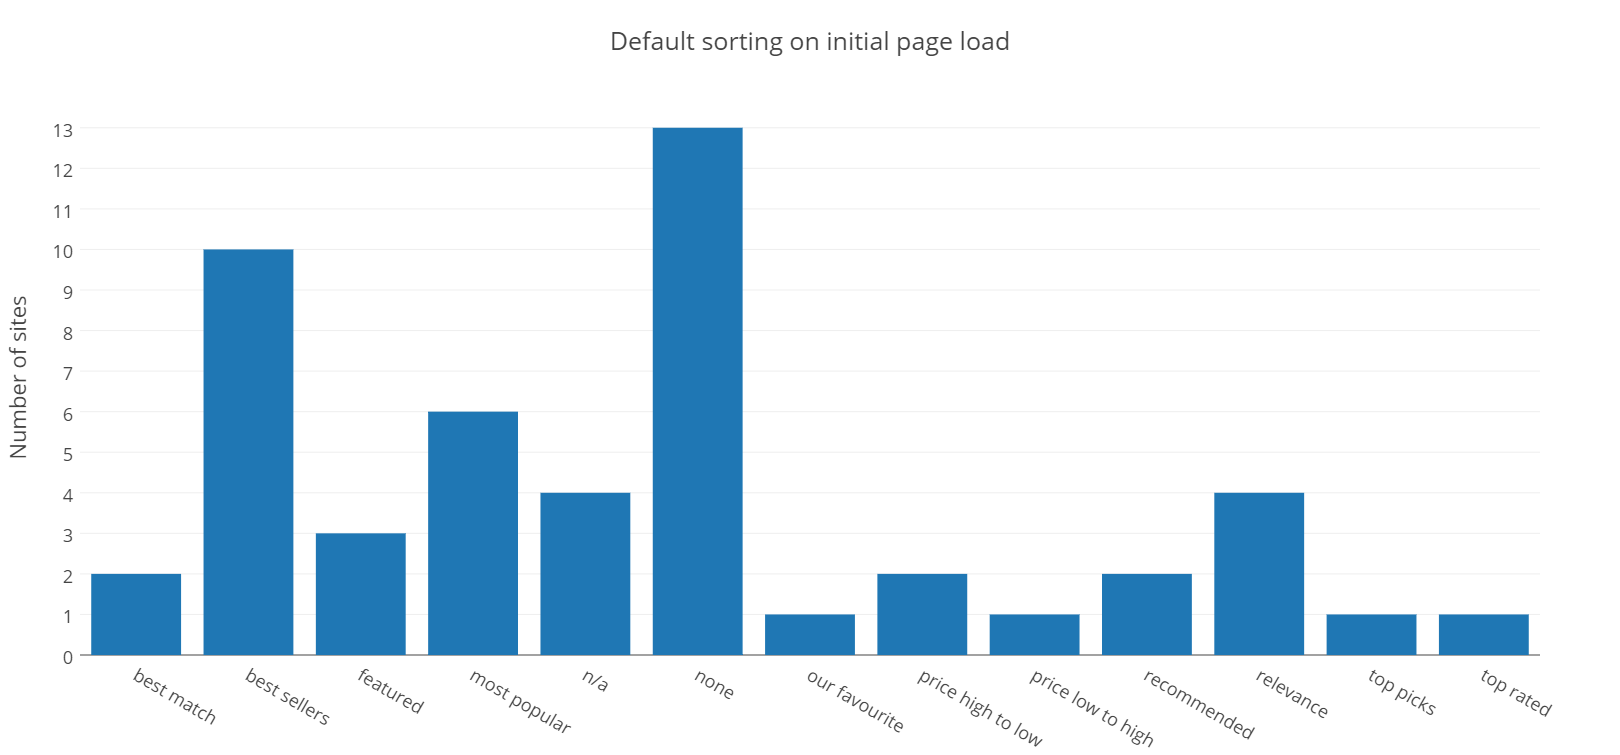 Default sorting on initial page load